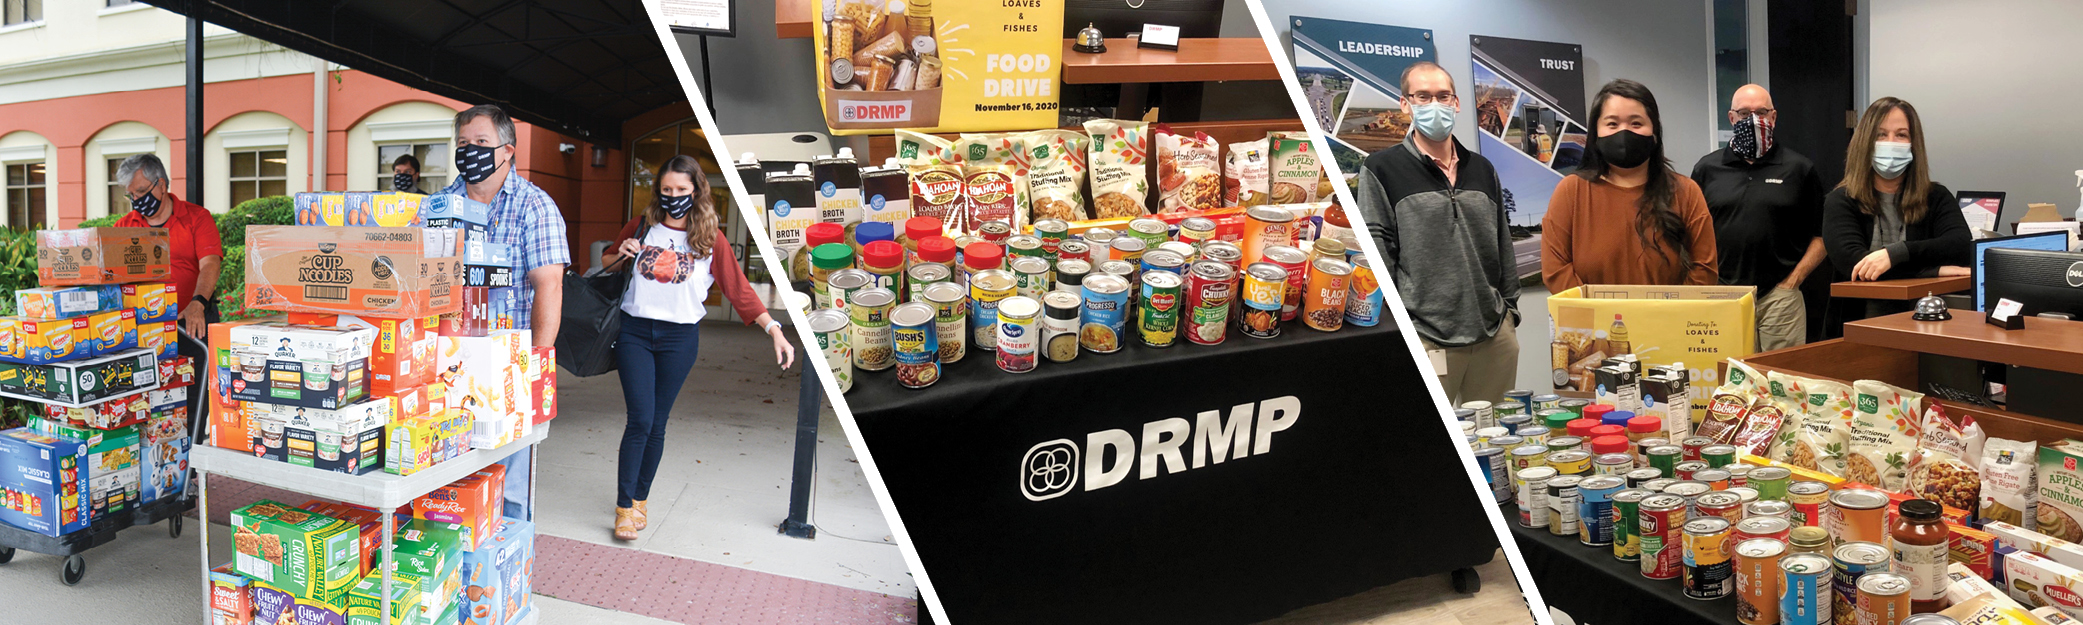 DRMP Provides Relief with Companywide Food Drive 